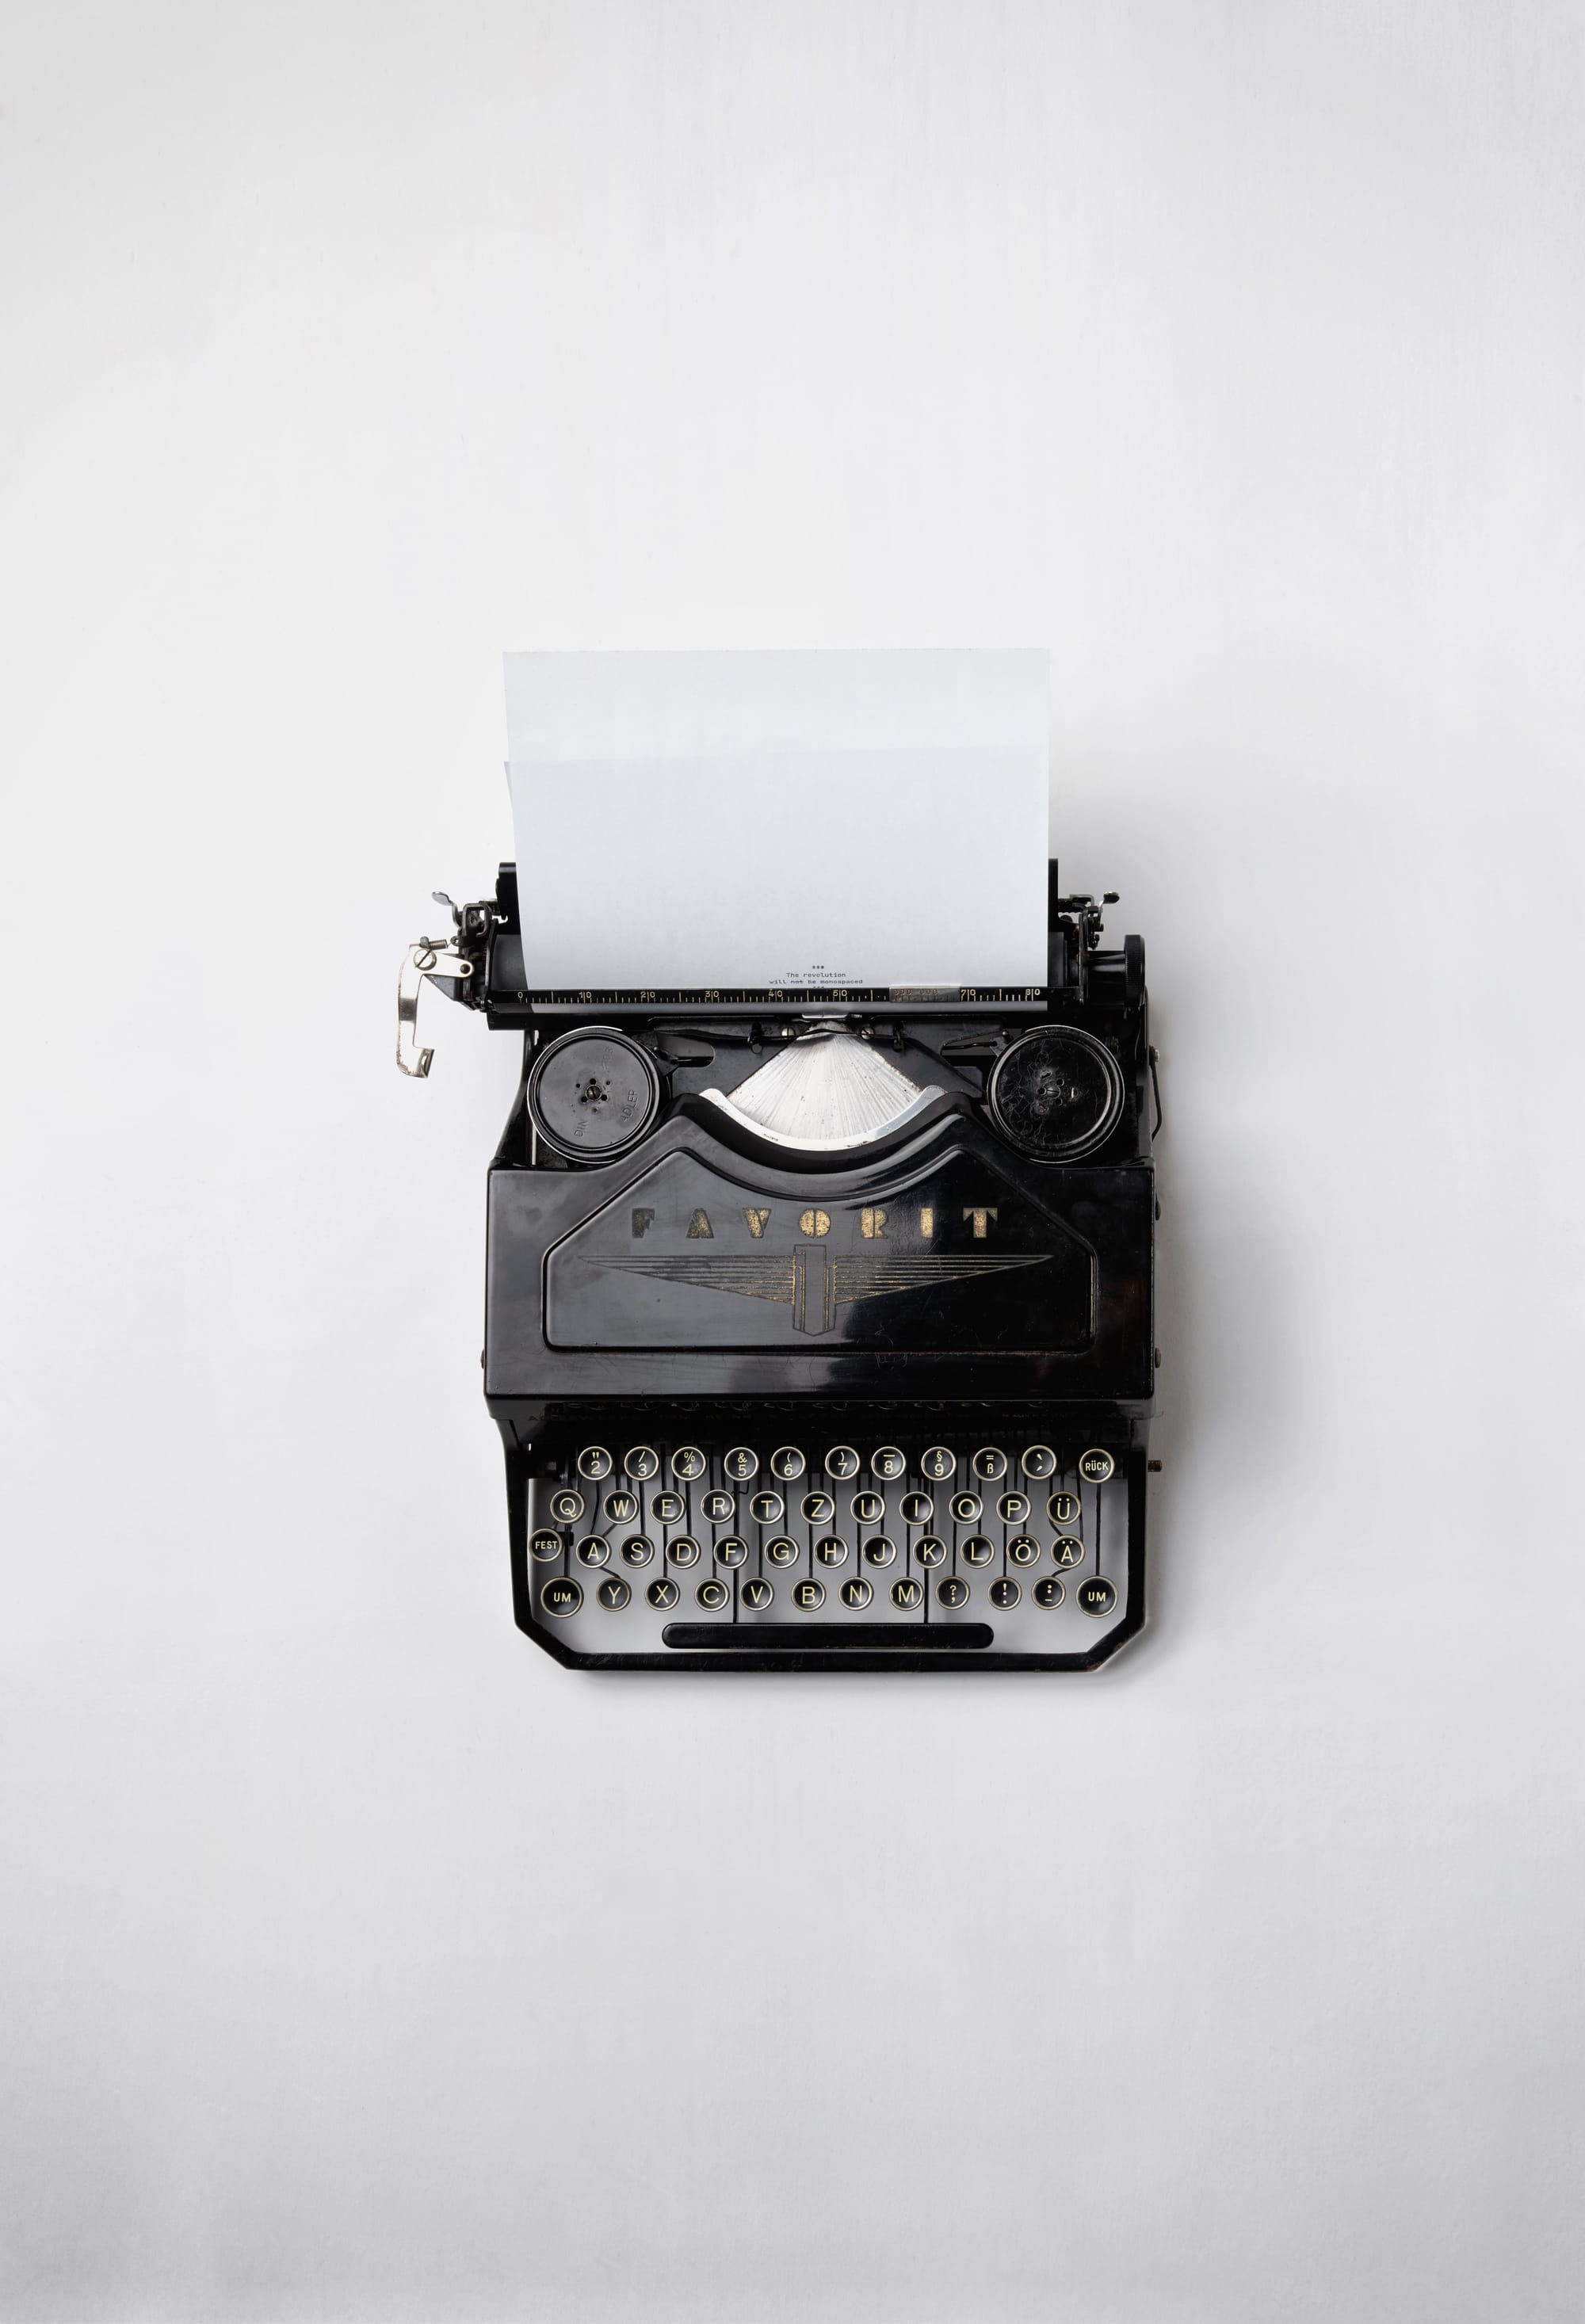 A black typerwriter against a white background